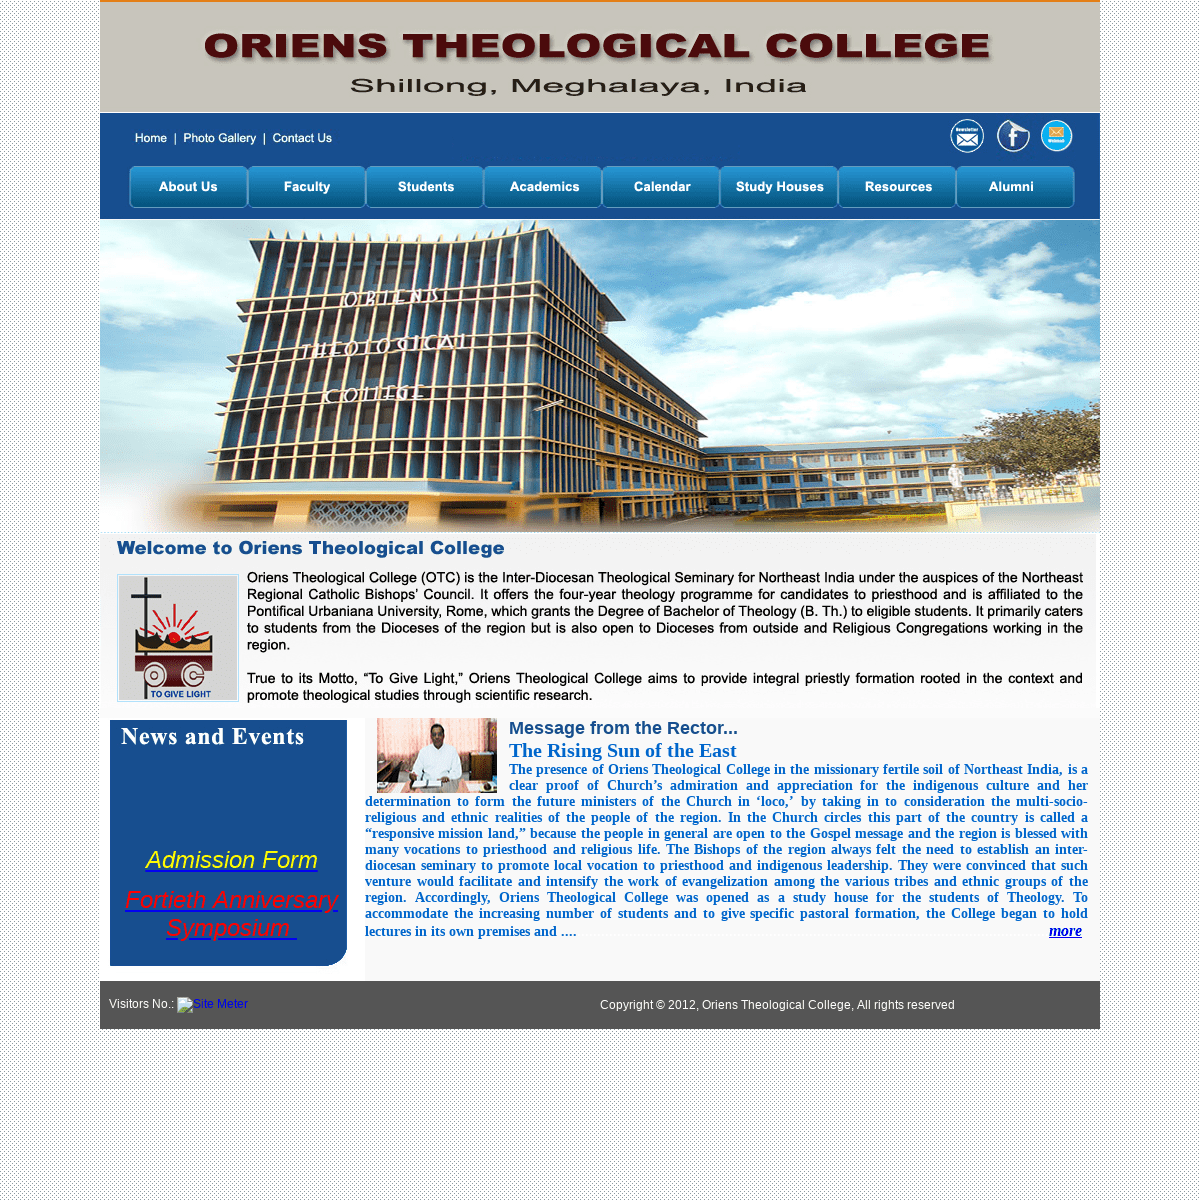 Welcome to Oriens Theological College